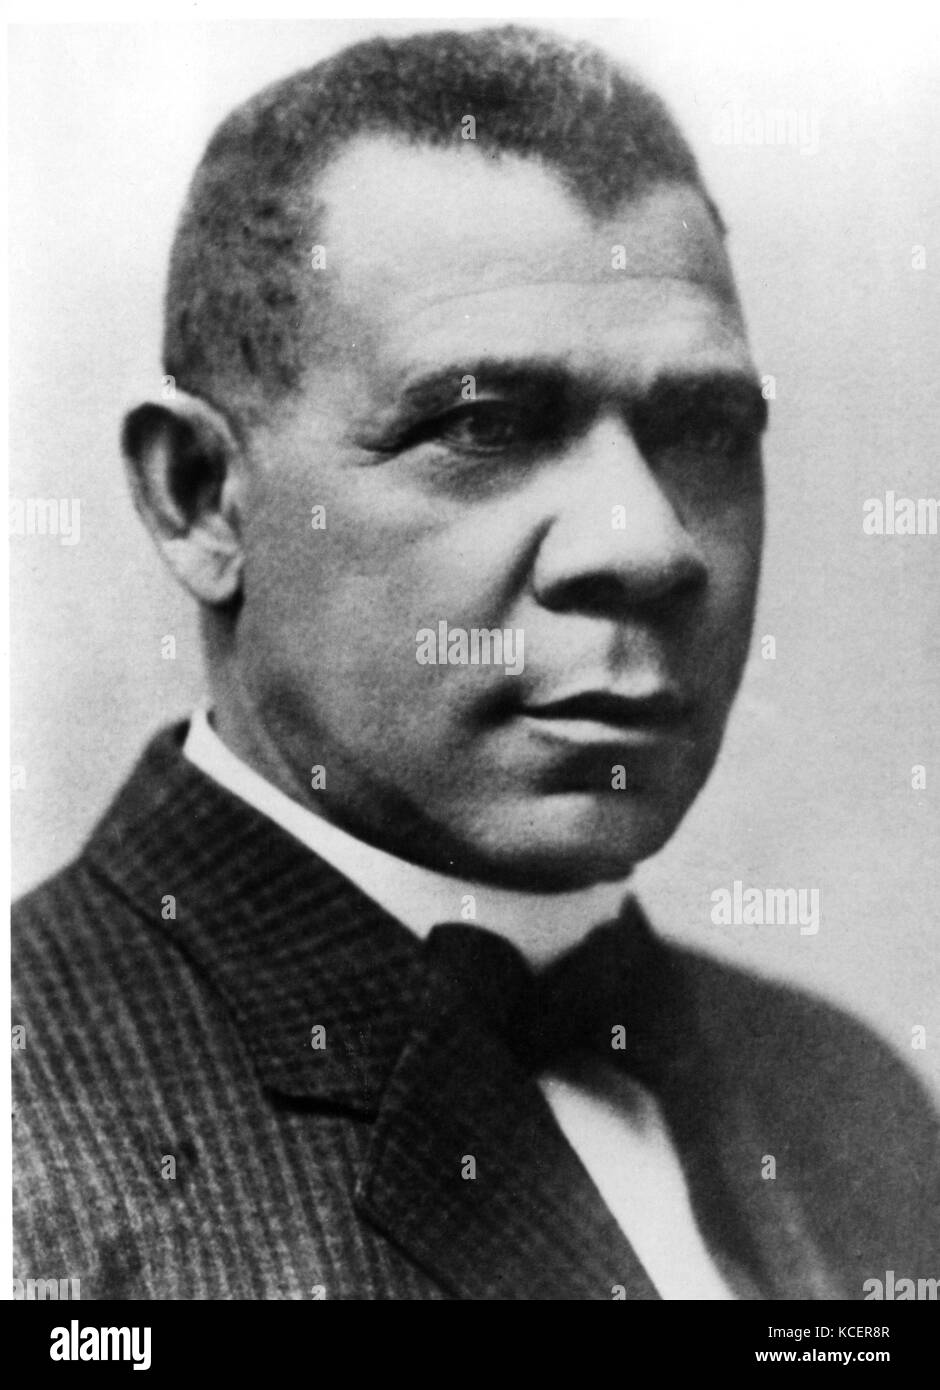 Booker Taliaferro Washington (April 5, 1856 – November 14, 1915) was an American educator, author, orator, and advisor to presidents of the United States. Between 1890 and 1915, Washington was the dominant leader in the African-American community. Stock Photo